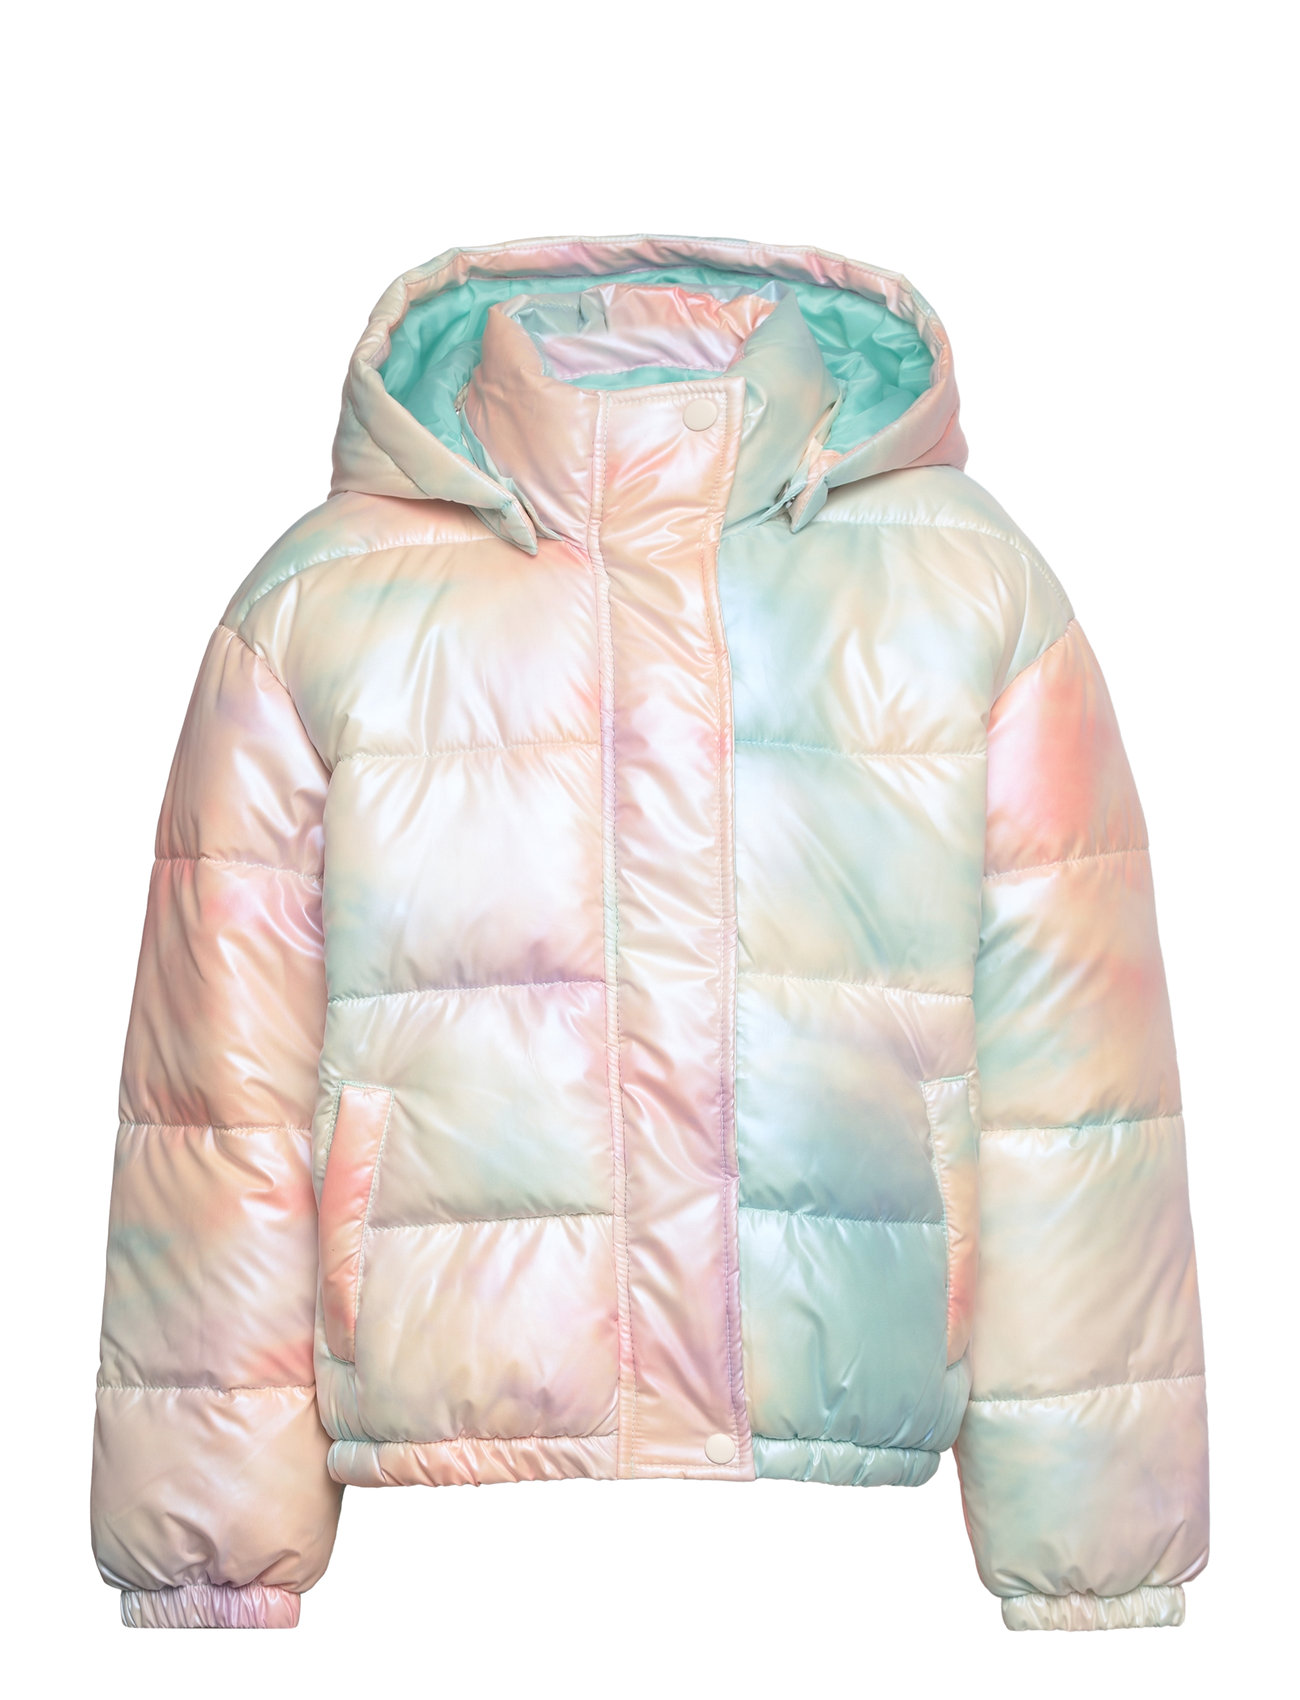 name it it and name Buy from Puffer at returns €. delivery Jacket Fast 31.50 online & Puffer Nkfmash Padded Boozt.com. - easy